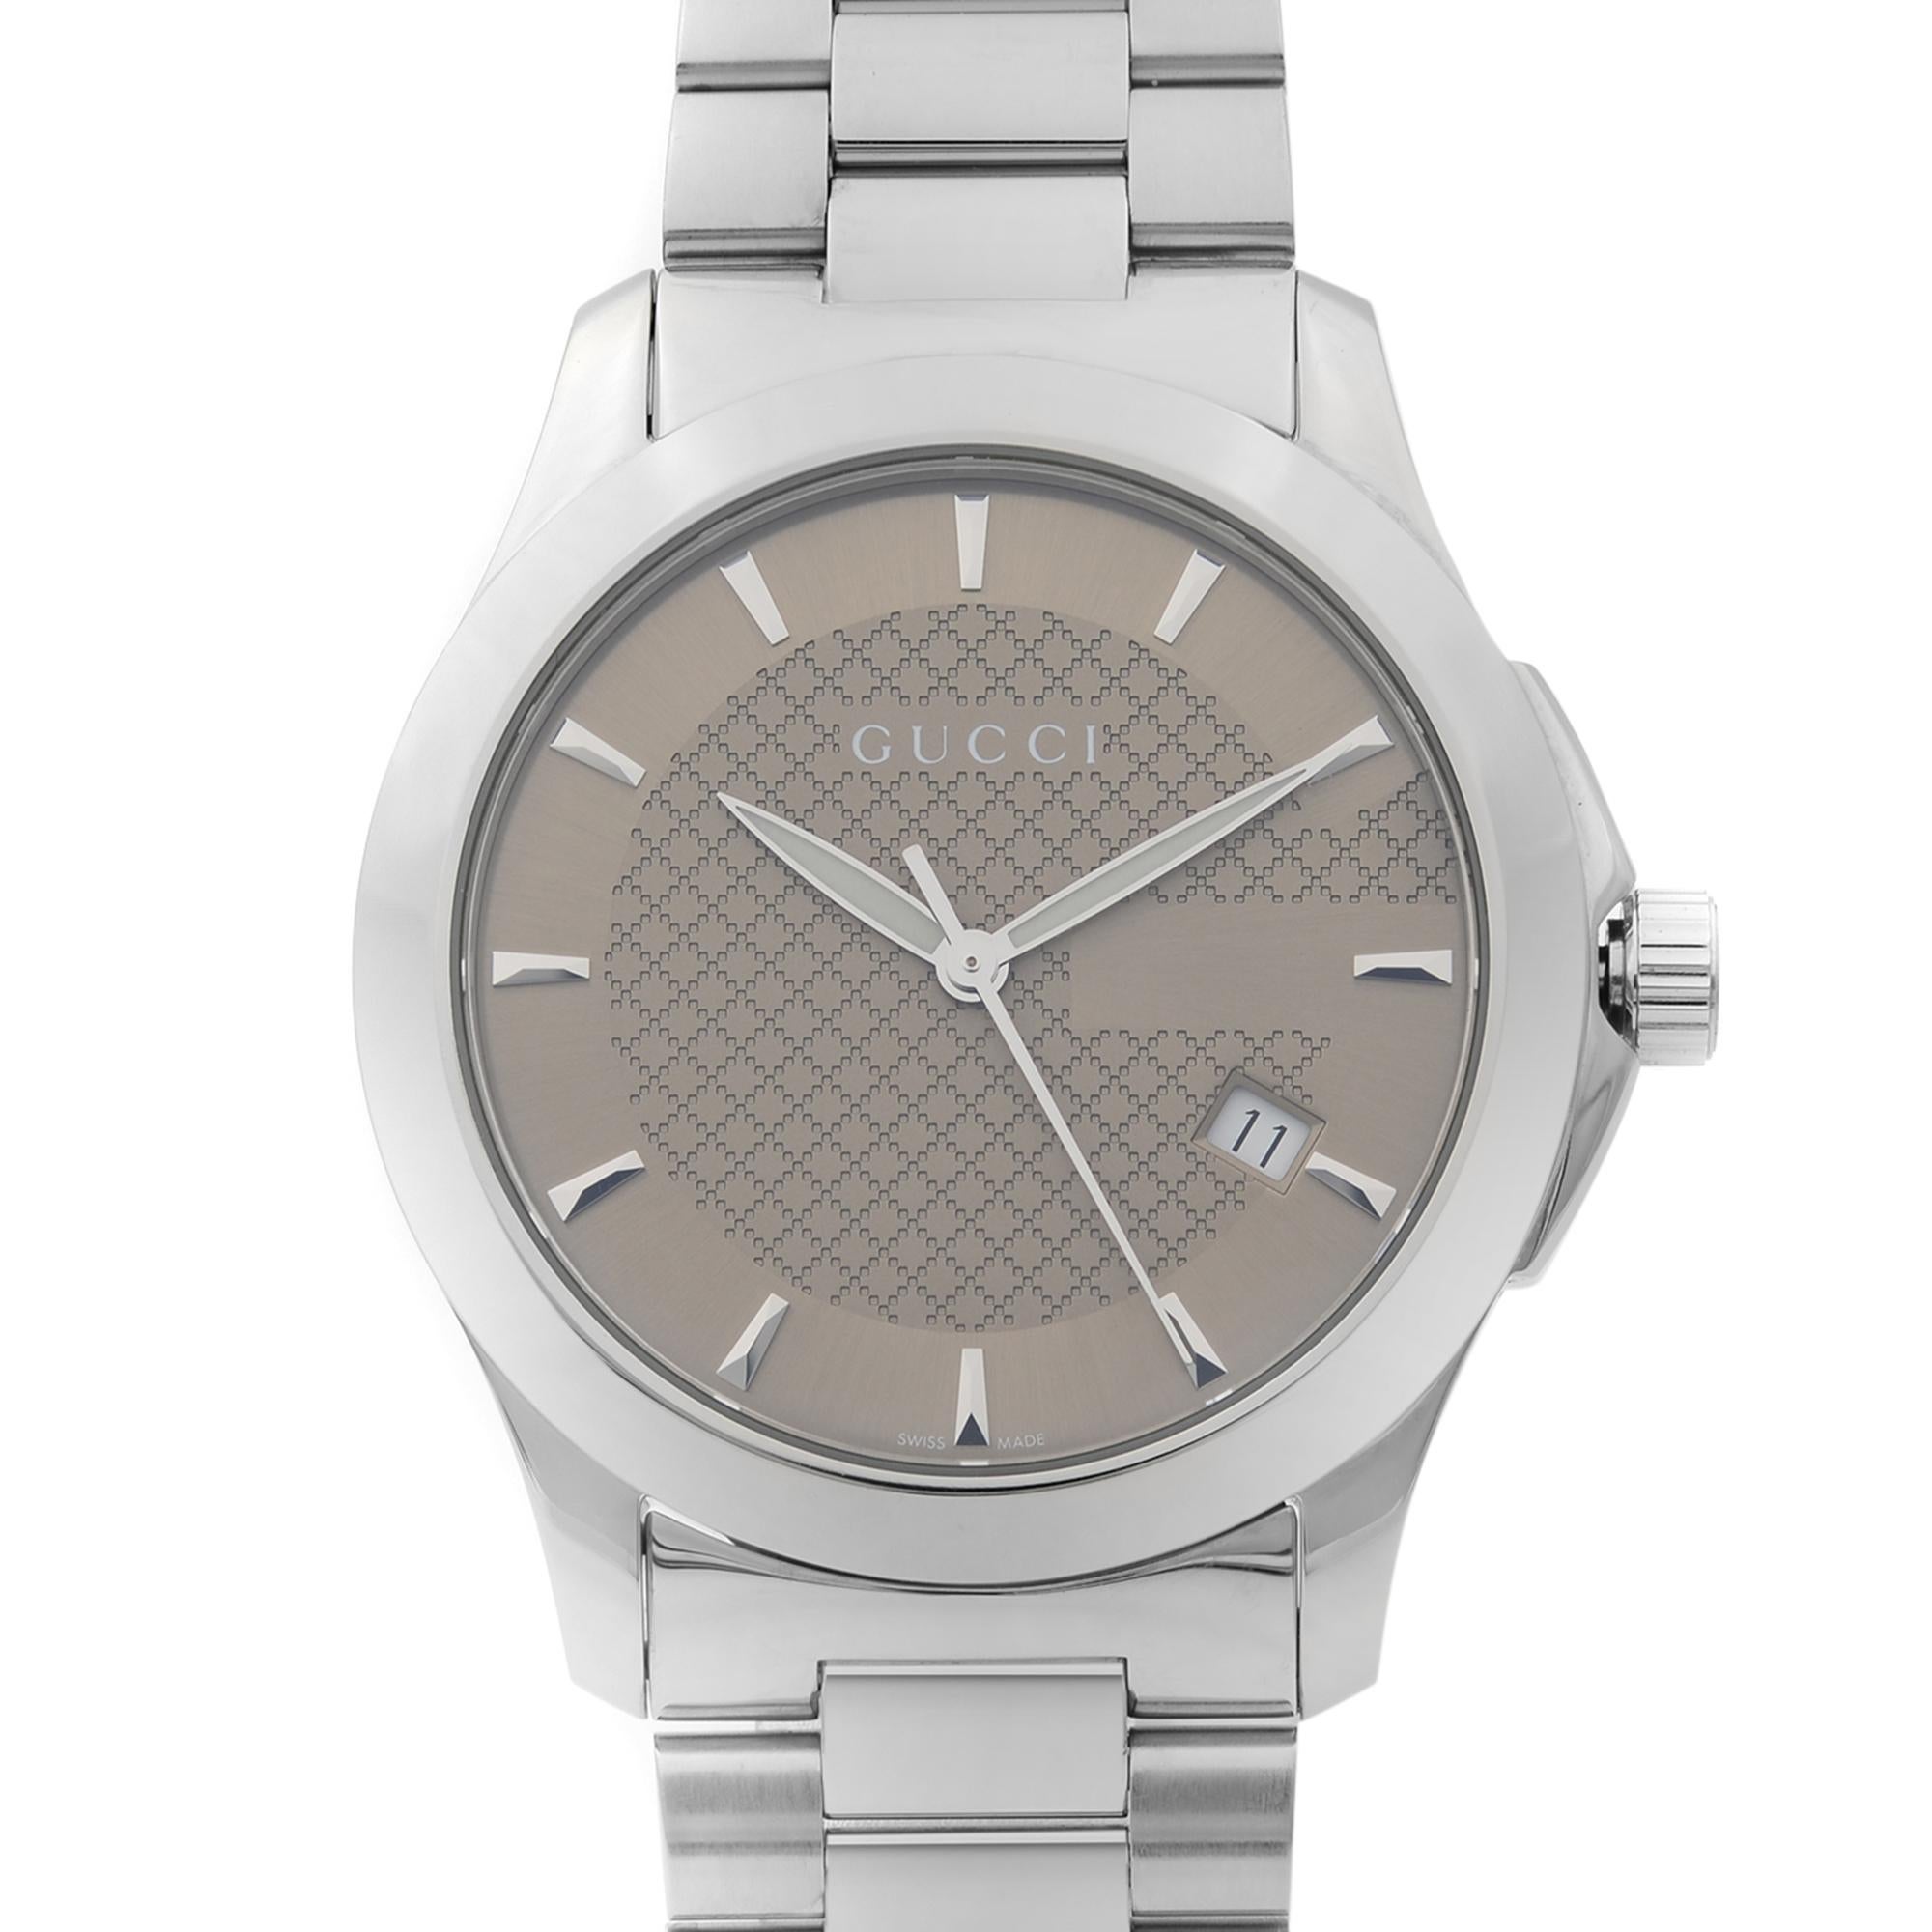 This display model Gucci G-Timeless YA126406 is a beautiful men's timepiece that is powered by quartz (battery) movement which is cased in a stainless steel case. It has a round shape face, date indicator dial and has hand sticks style markers. Case